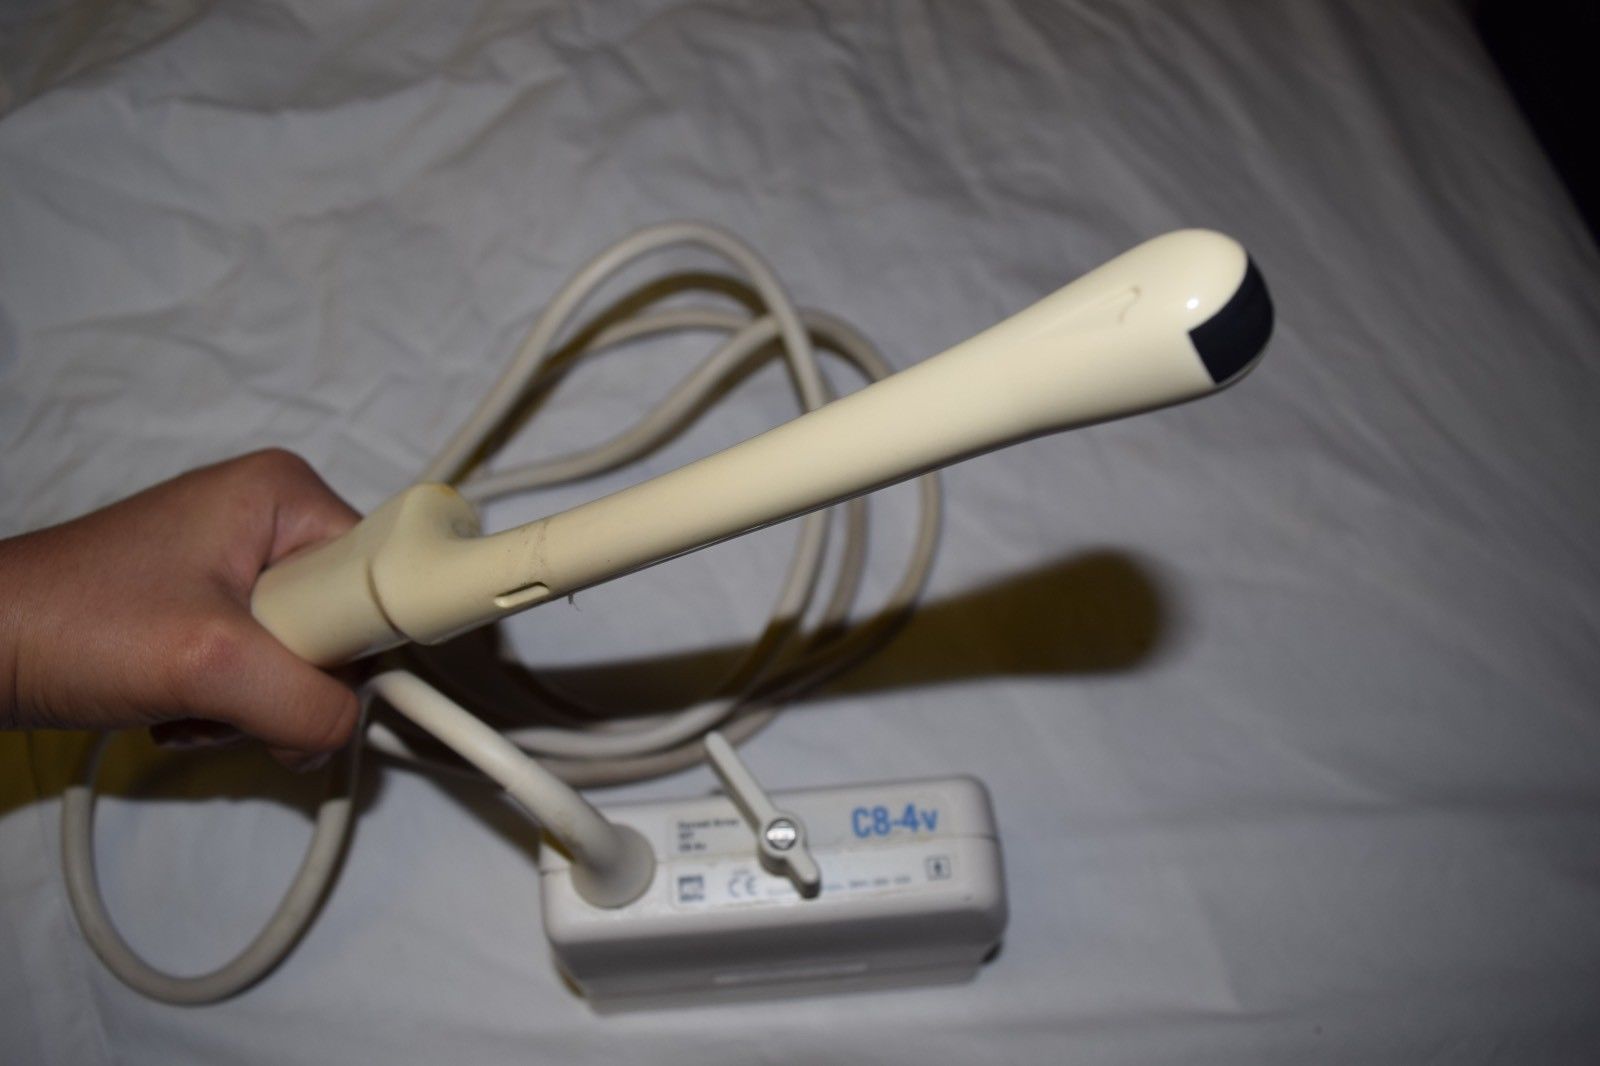 PHILIPS ATL C4-2  Ultrasound Probe DIAGNOSTIC ULTRASOUND MACHINES FOR SALE